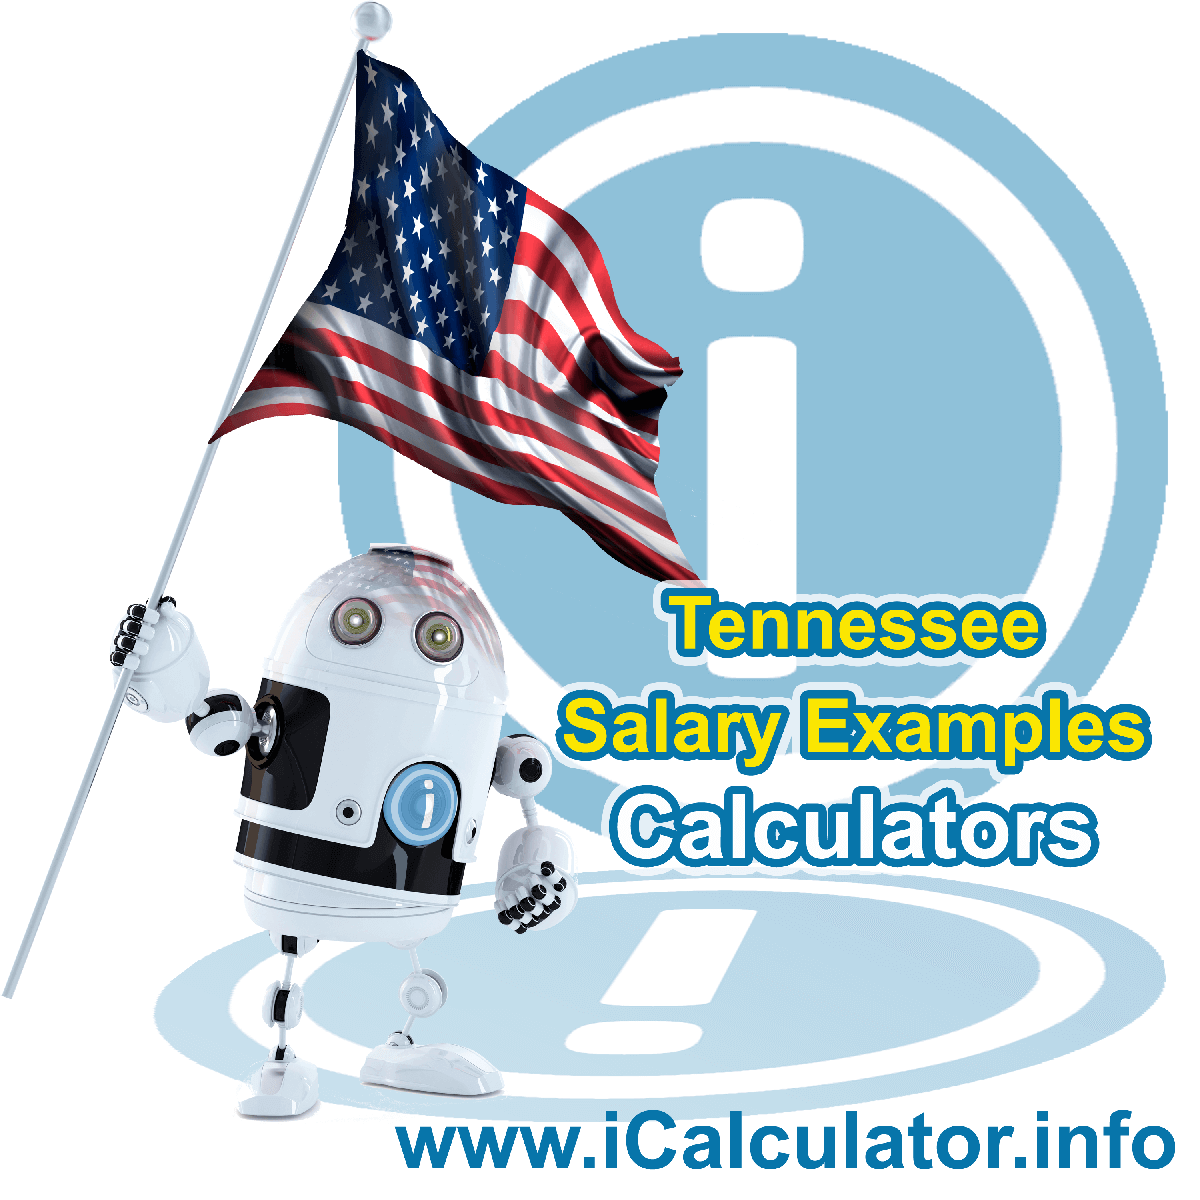 Tennessee Salary Example for $200,000.00 in 2022 | iCalculator™ | $200,000.00 salary example for employee and employer paying Tennessee State tincome taxes. Detailed salary after tax calculation including Tennessee State Tax, Federal State Tax, Medicare Deductions, Social Security, Capital Gains and other income tax and salary deductions complete with supporting Tennessee state tax tables 